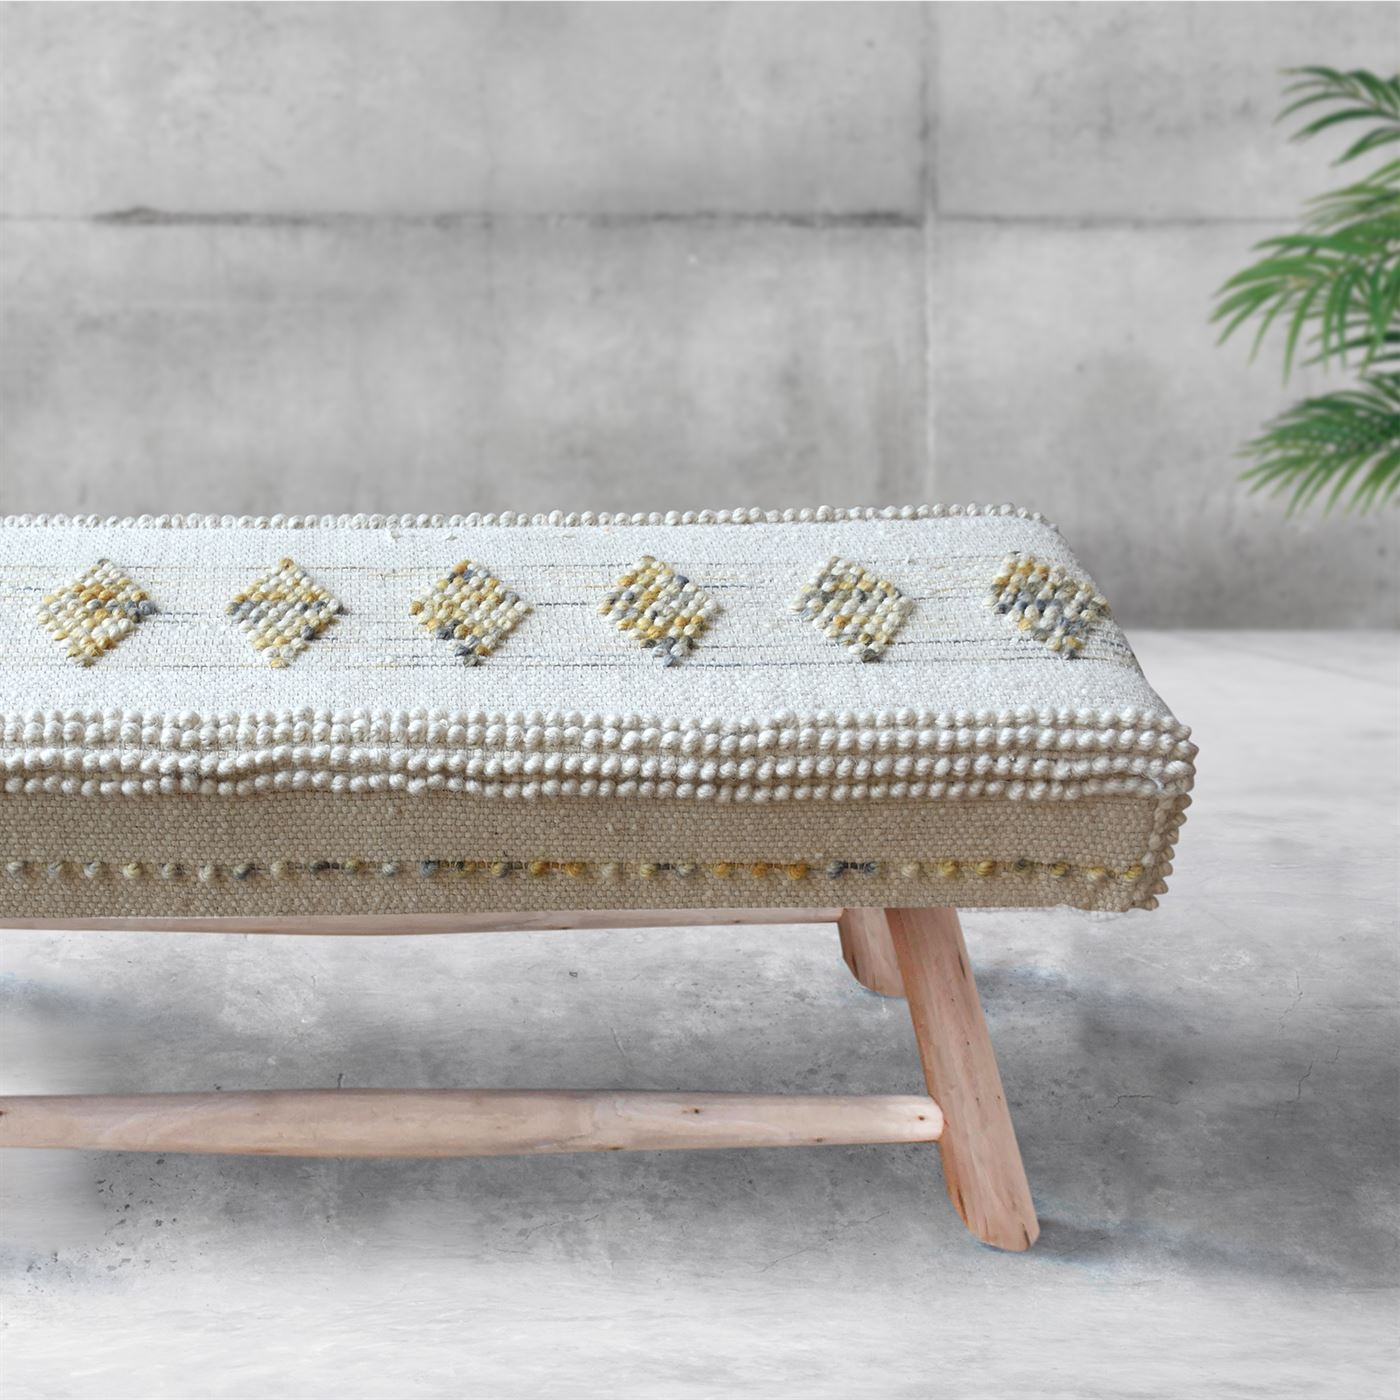 Ratize Bench, Wool, Natural, Pitloom, All Loop